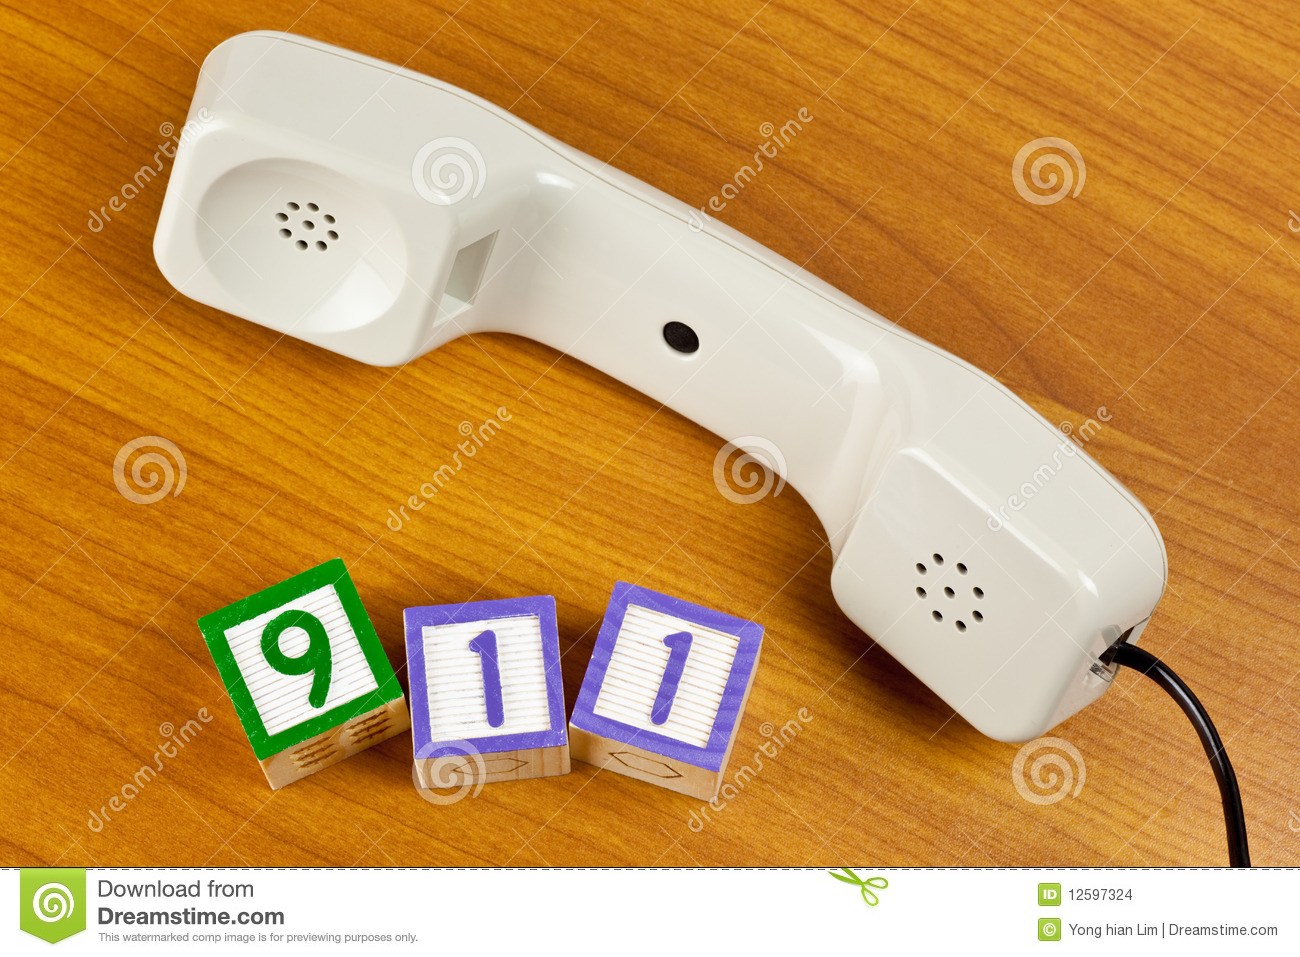 Phone Handset With Number Blocks 911 On A Table